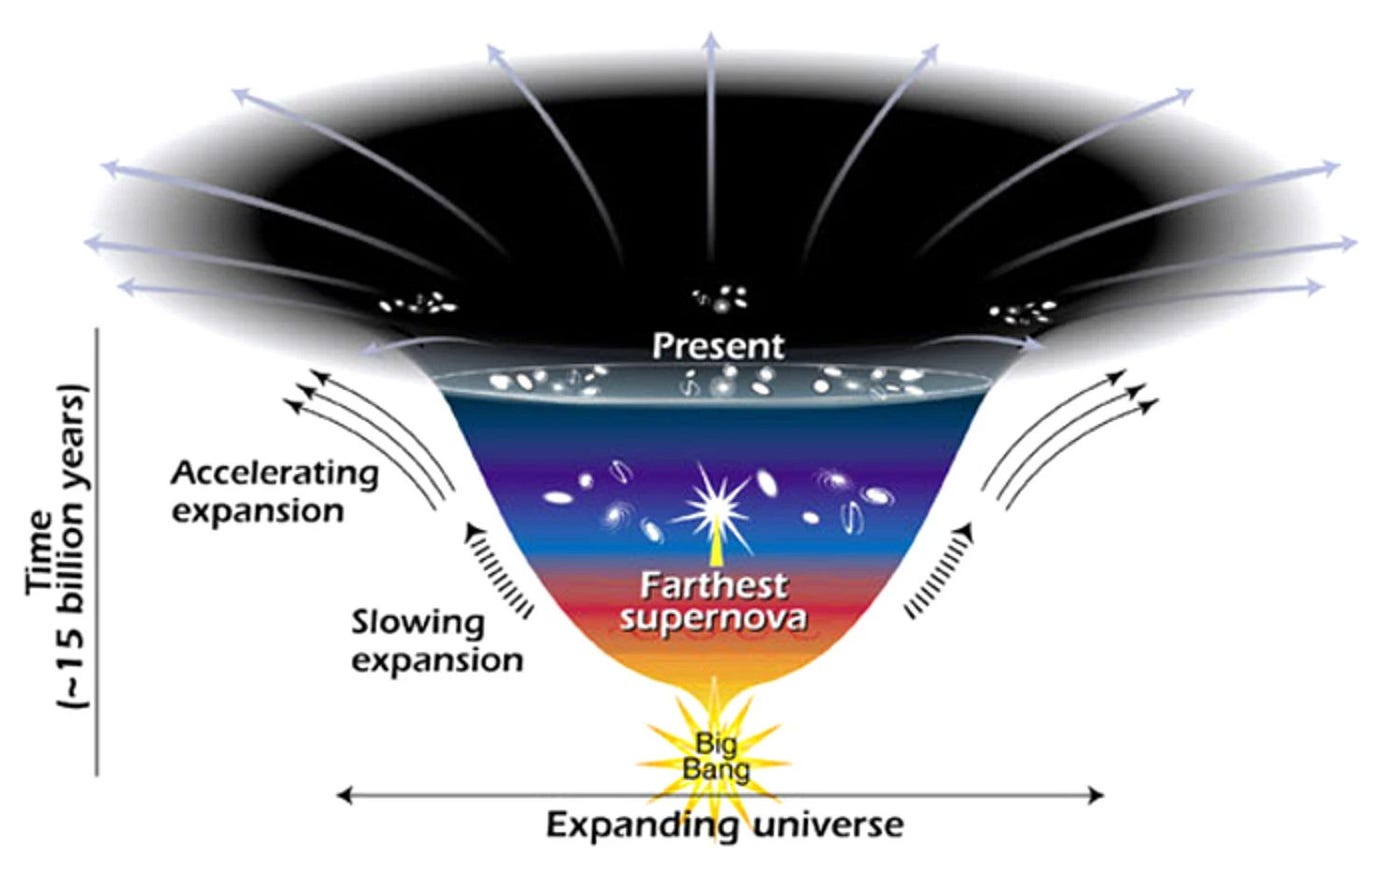 Ask Ethan: Is the Universe's expansion accelerating or not?